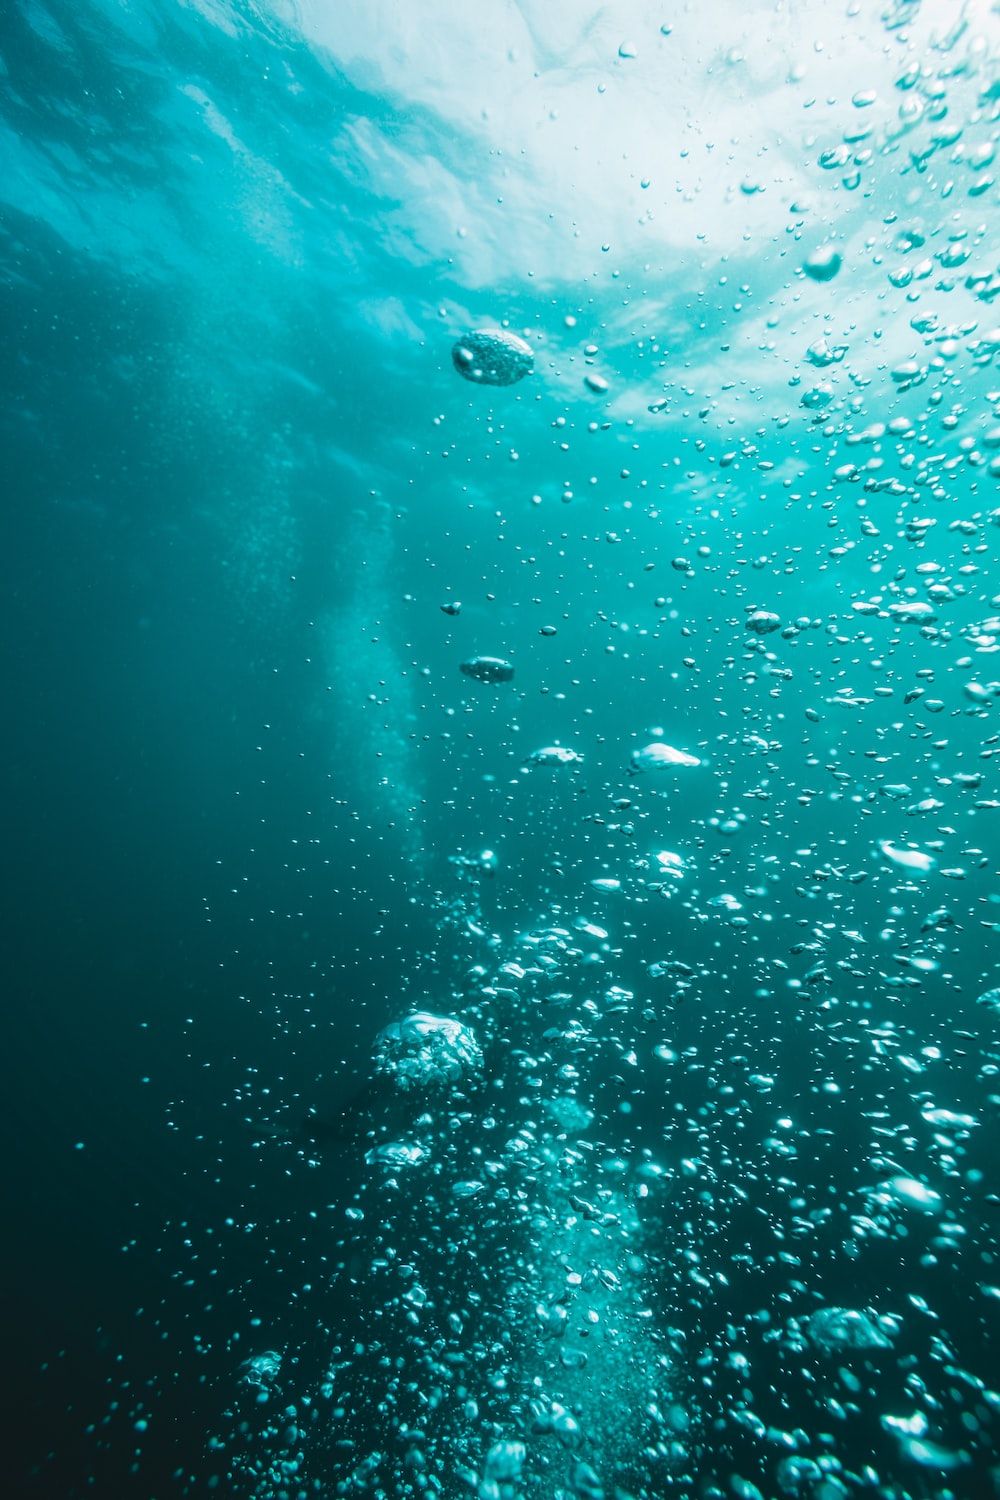 A large body of water with bubbles - Underwater